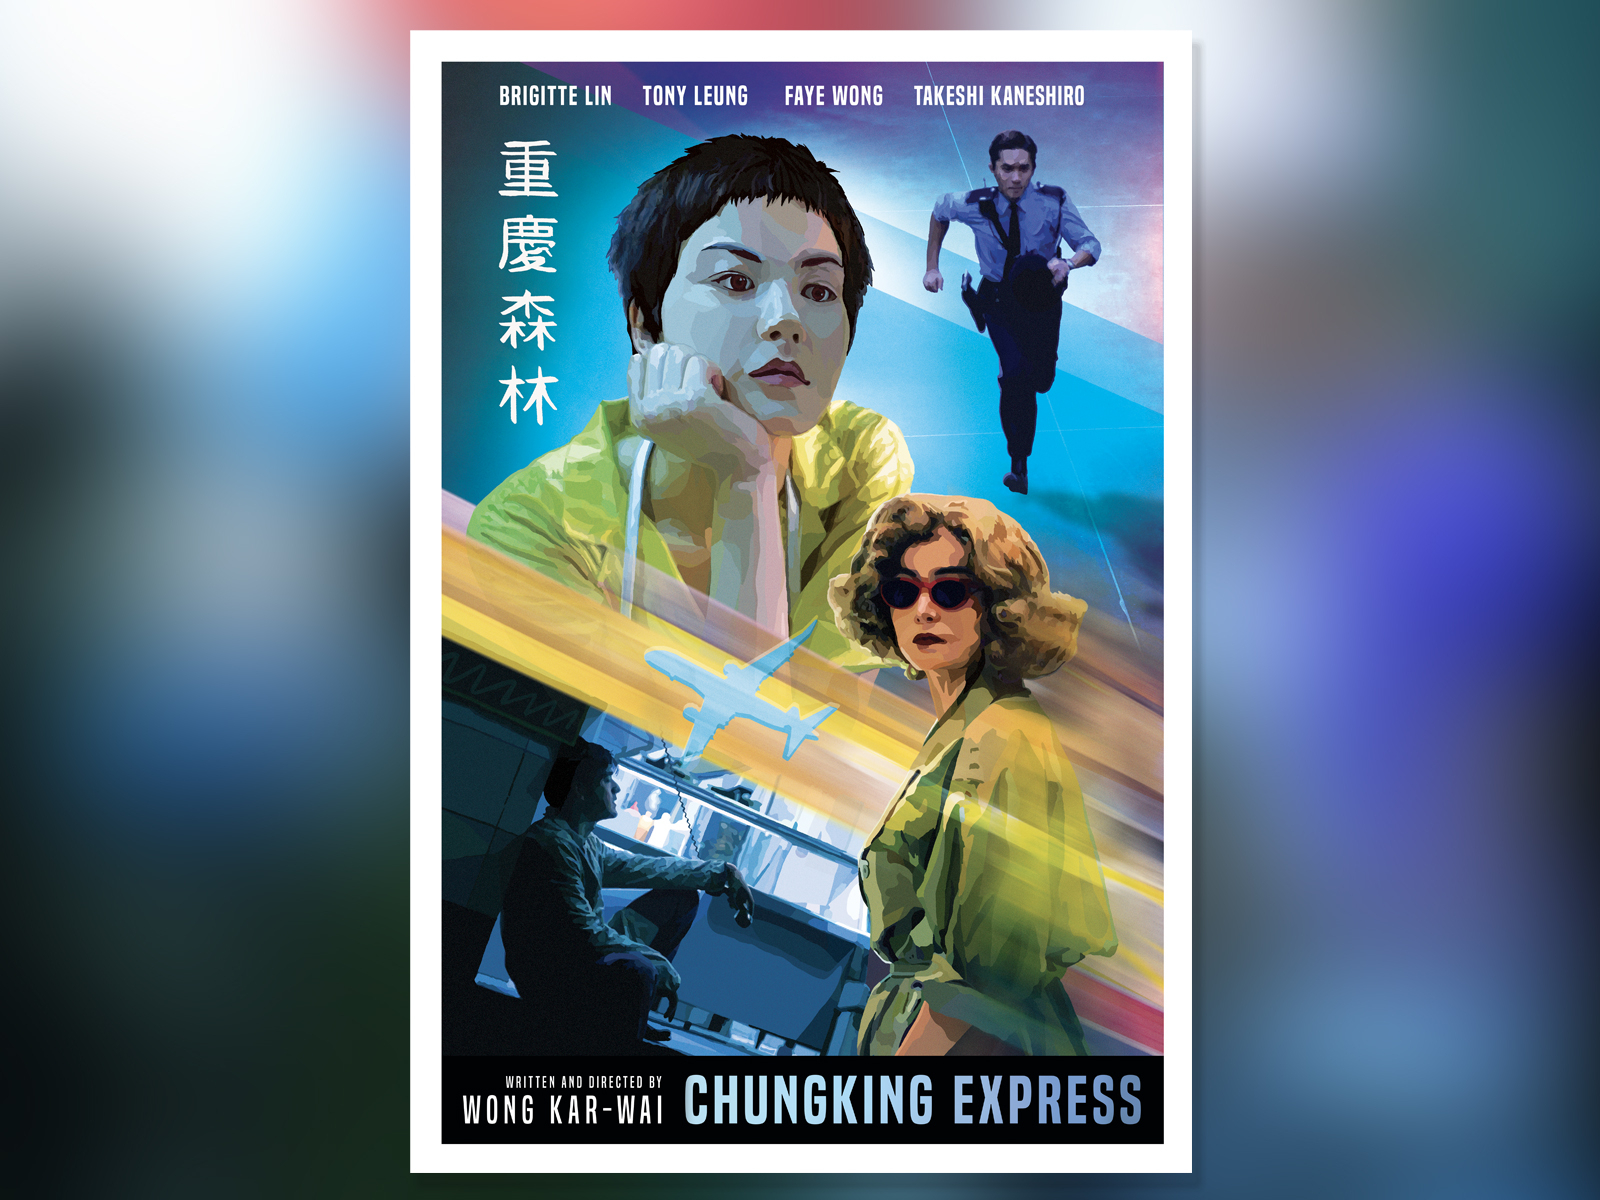 Chungking Express alternative movie poster by Chris Ayers Creative on  Dribbble